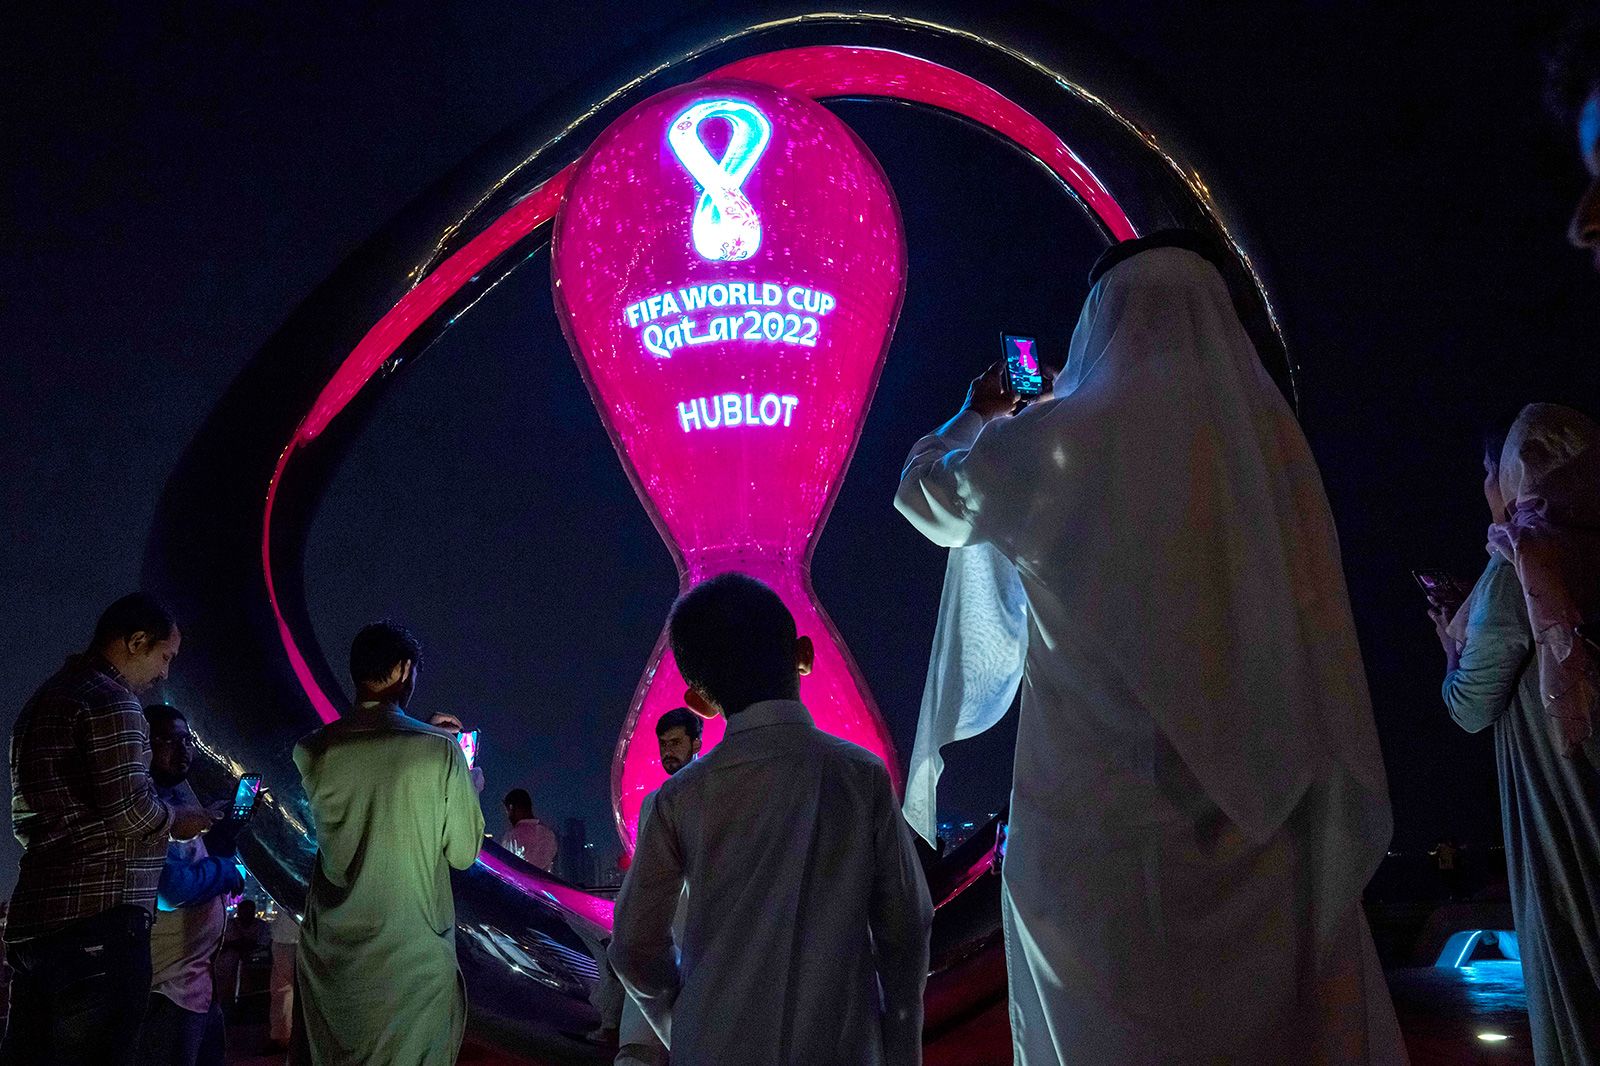 The World Cup has brought some change to Qatar. Will it last?